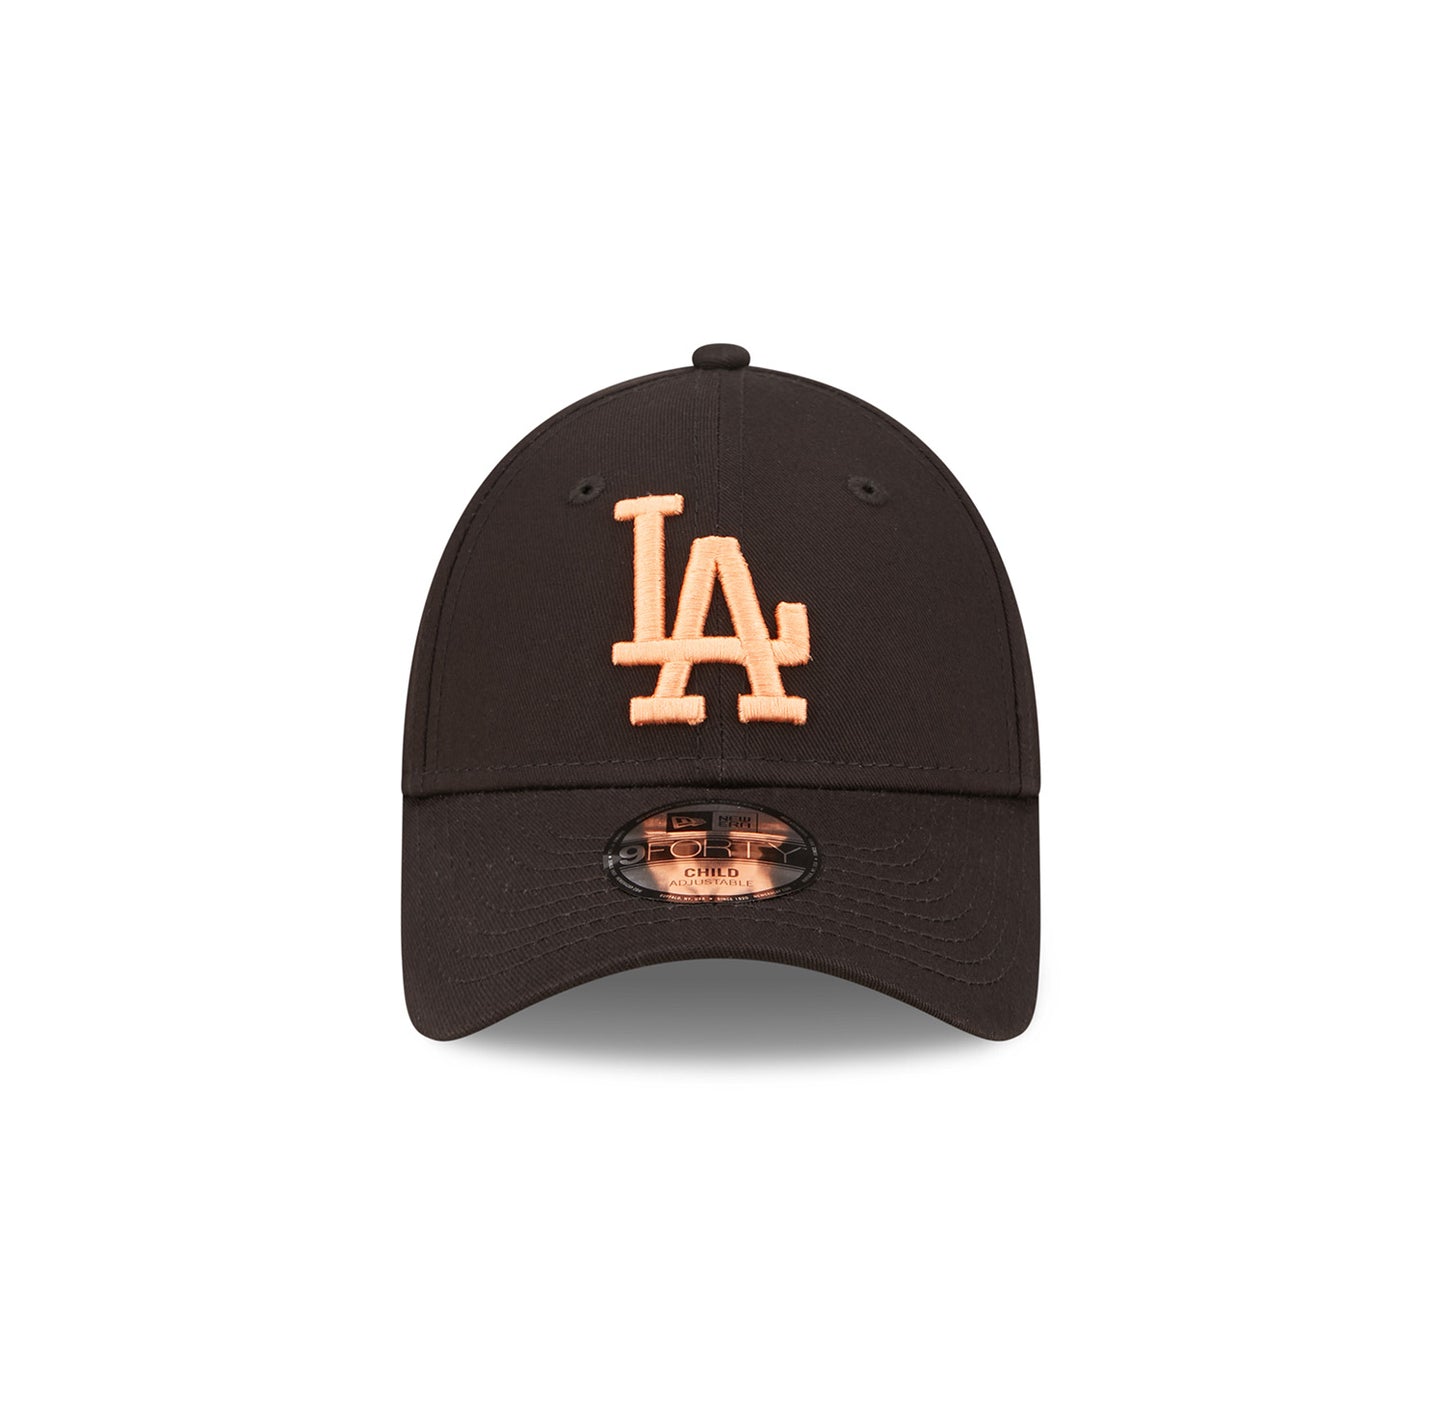 Los Angeles Dodgers New Era 9FORTY YOUTH Strap back Cap black